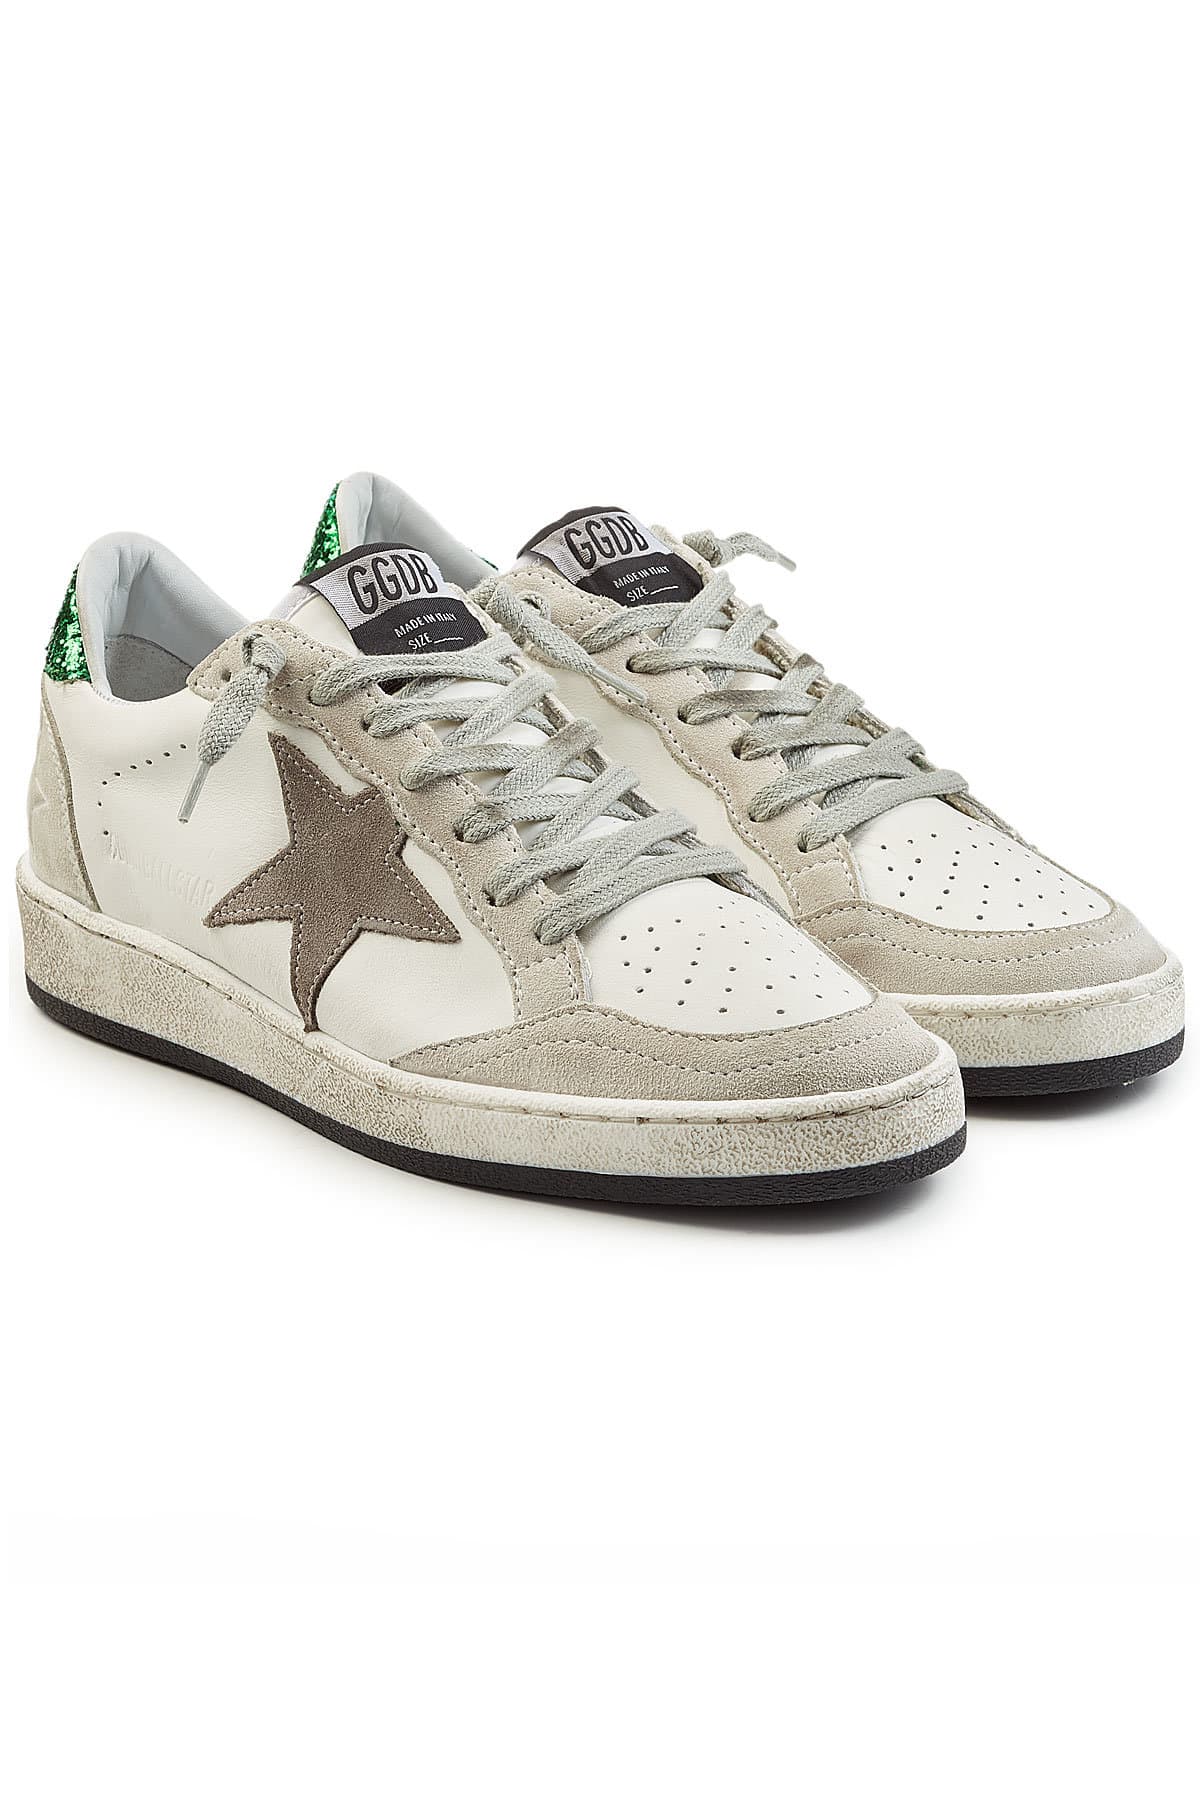 Golden Goose Deluxe Brand - Ball Star Leather Sneakers with Suede and Glitter